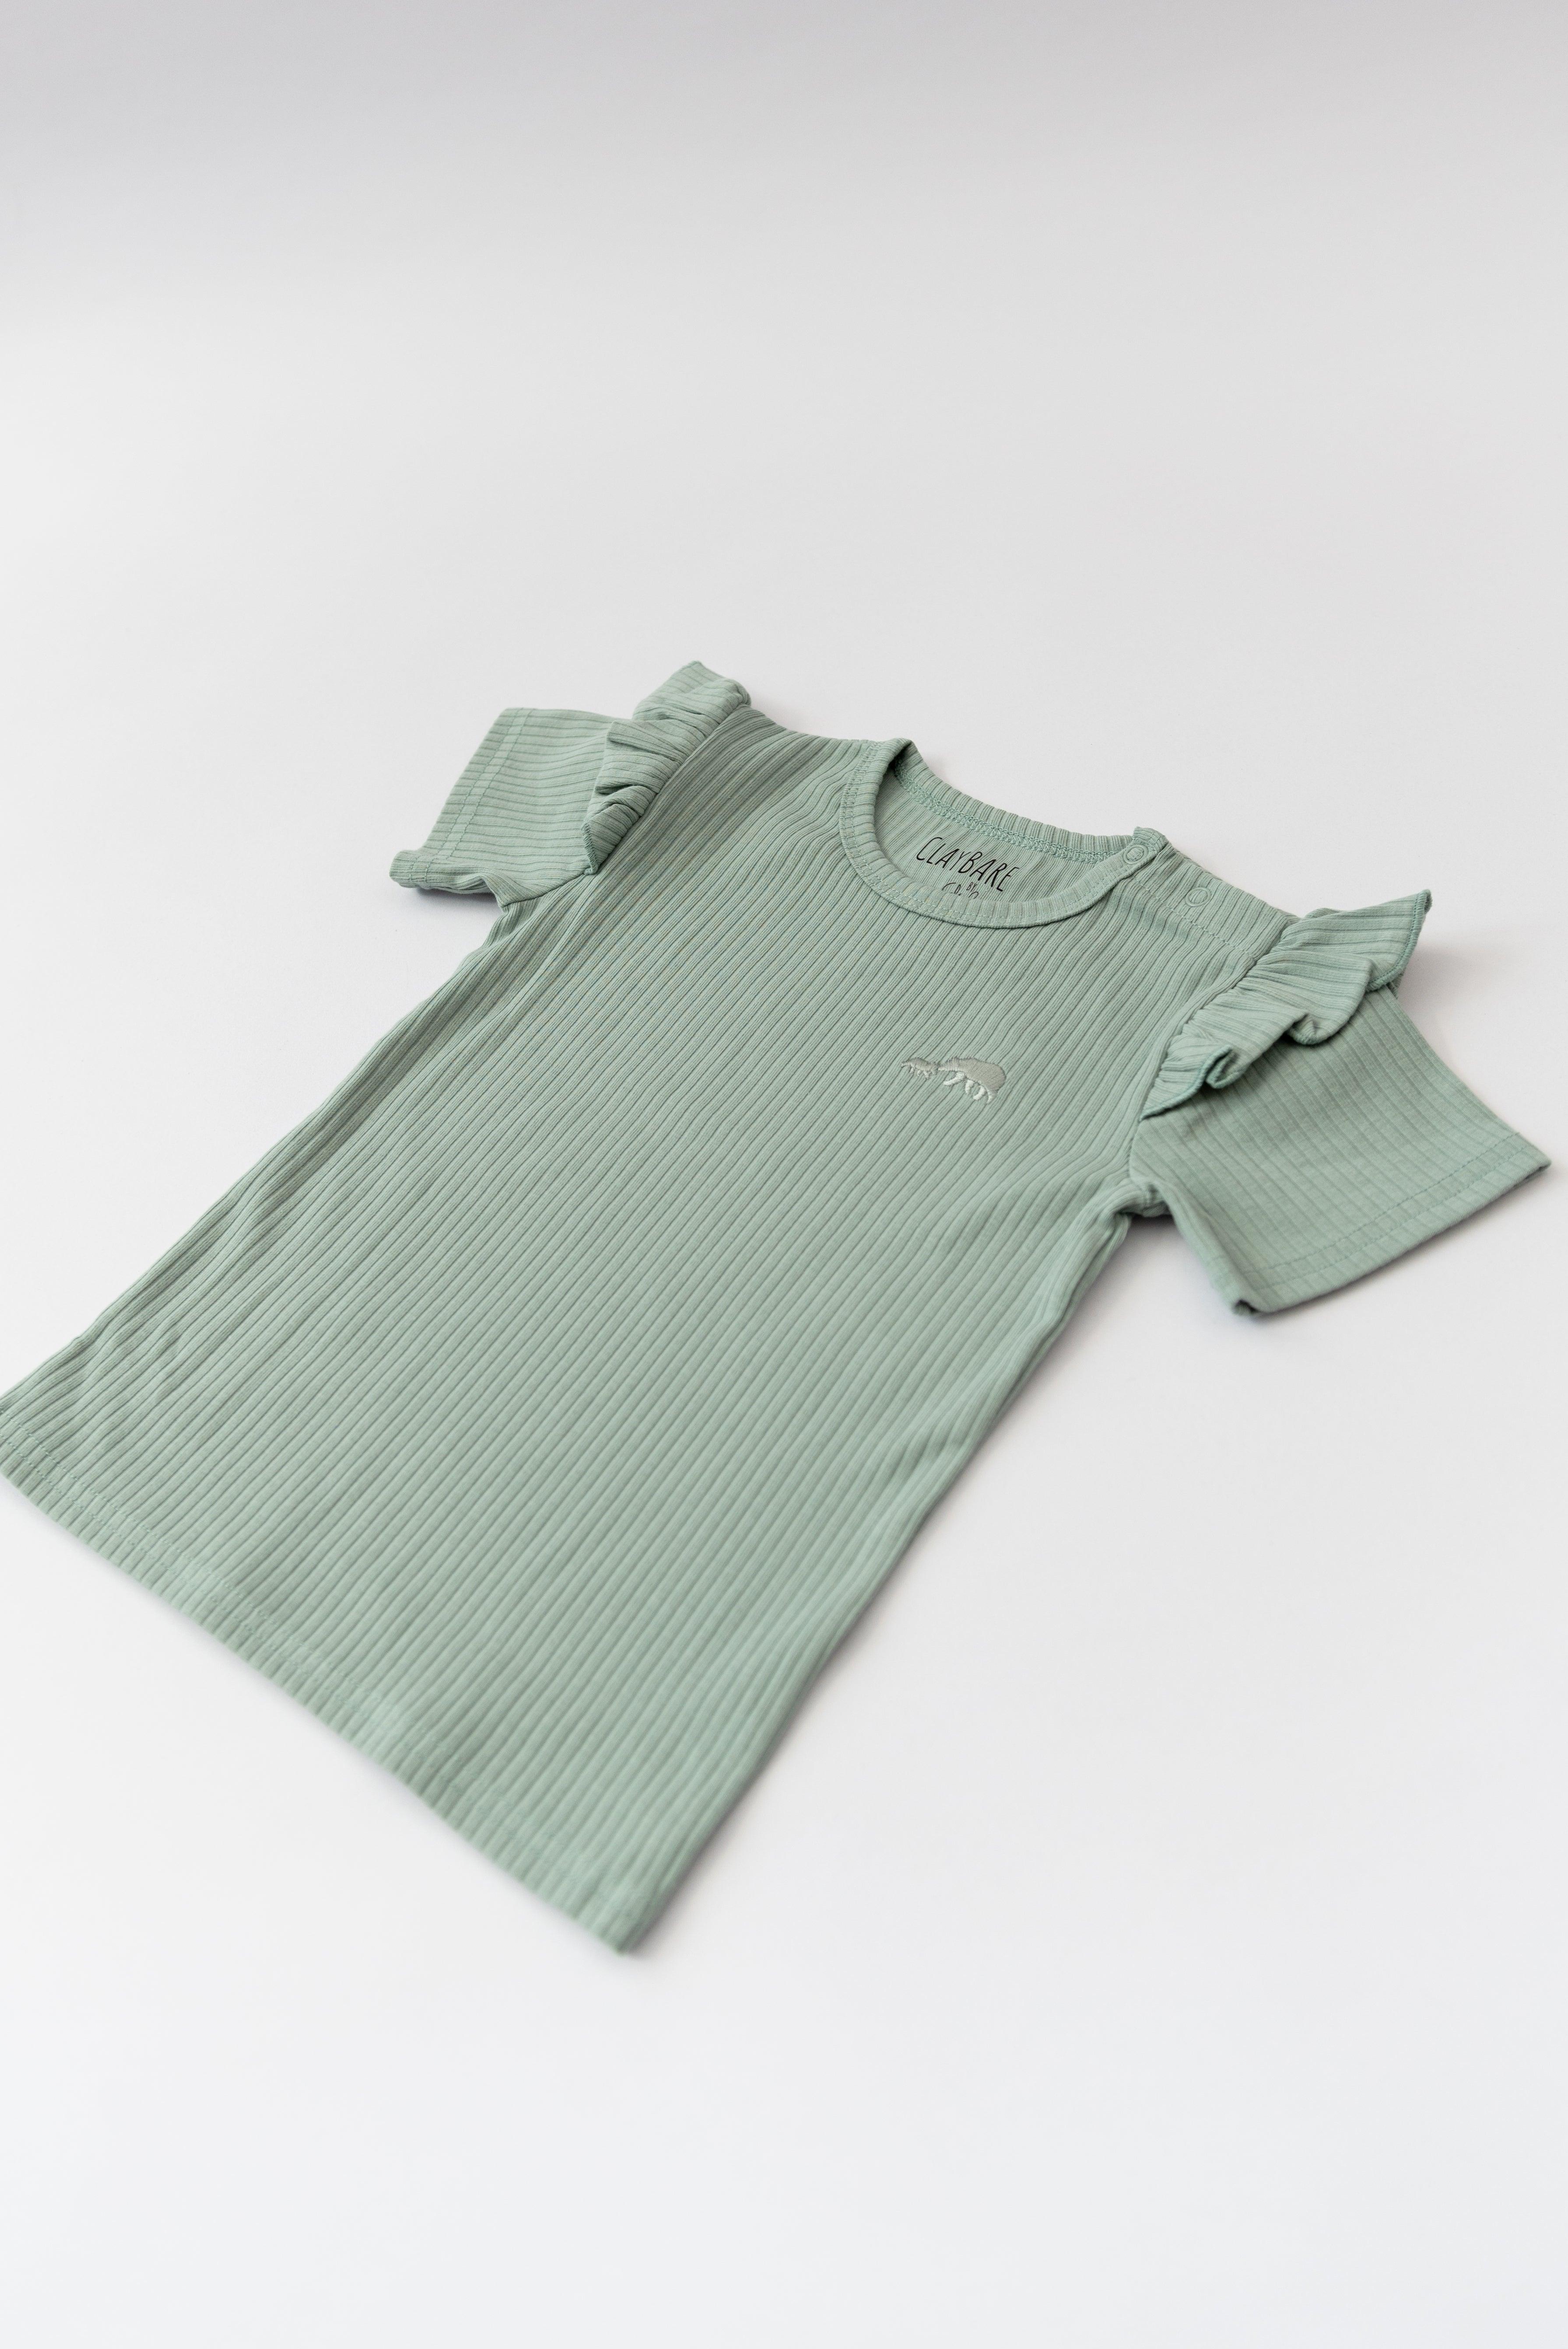 files/mint-frill-ribbed-short-sleeve-top-claybearofficial-4.jpg